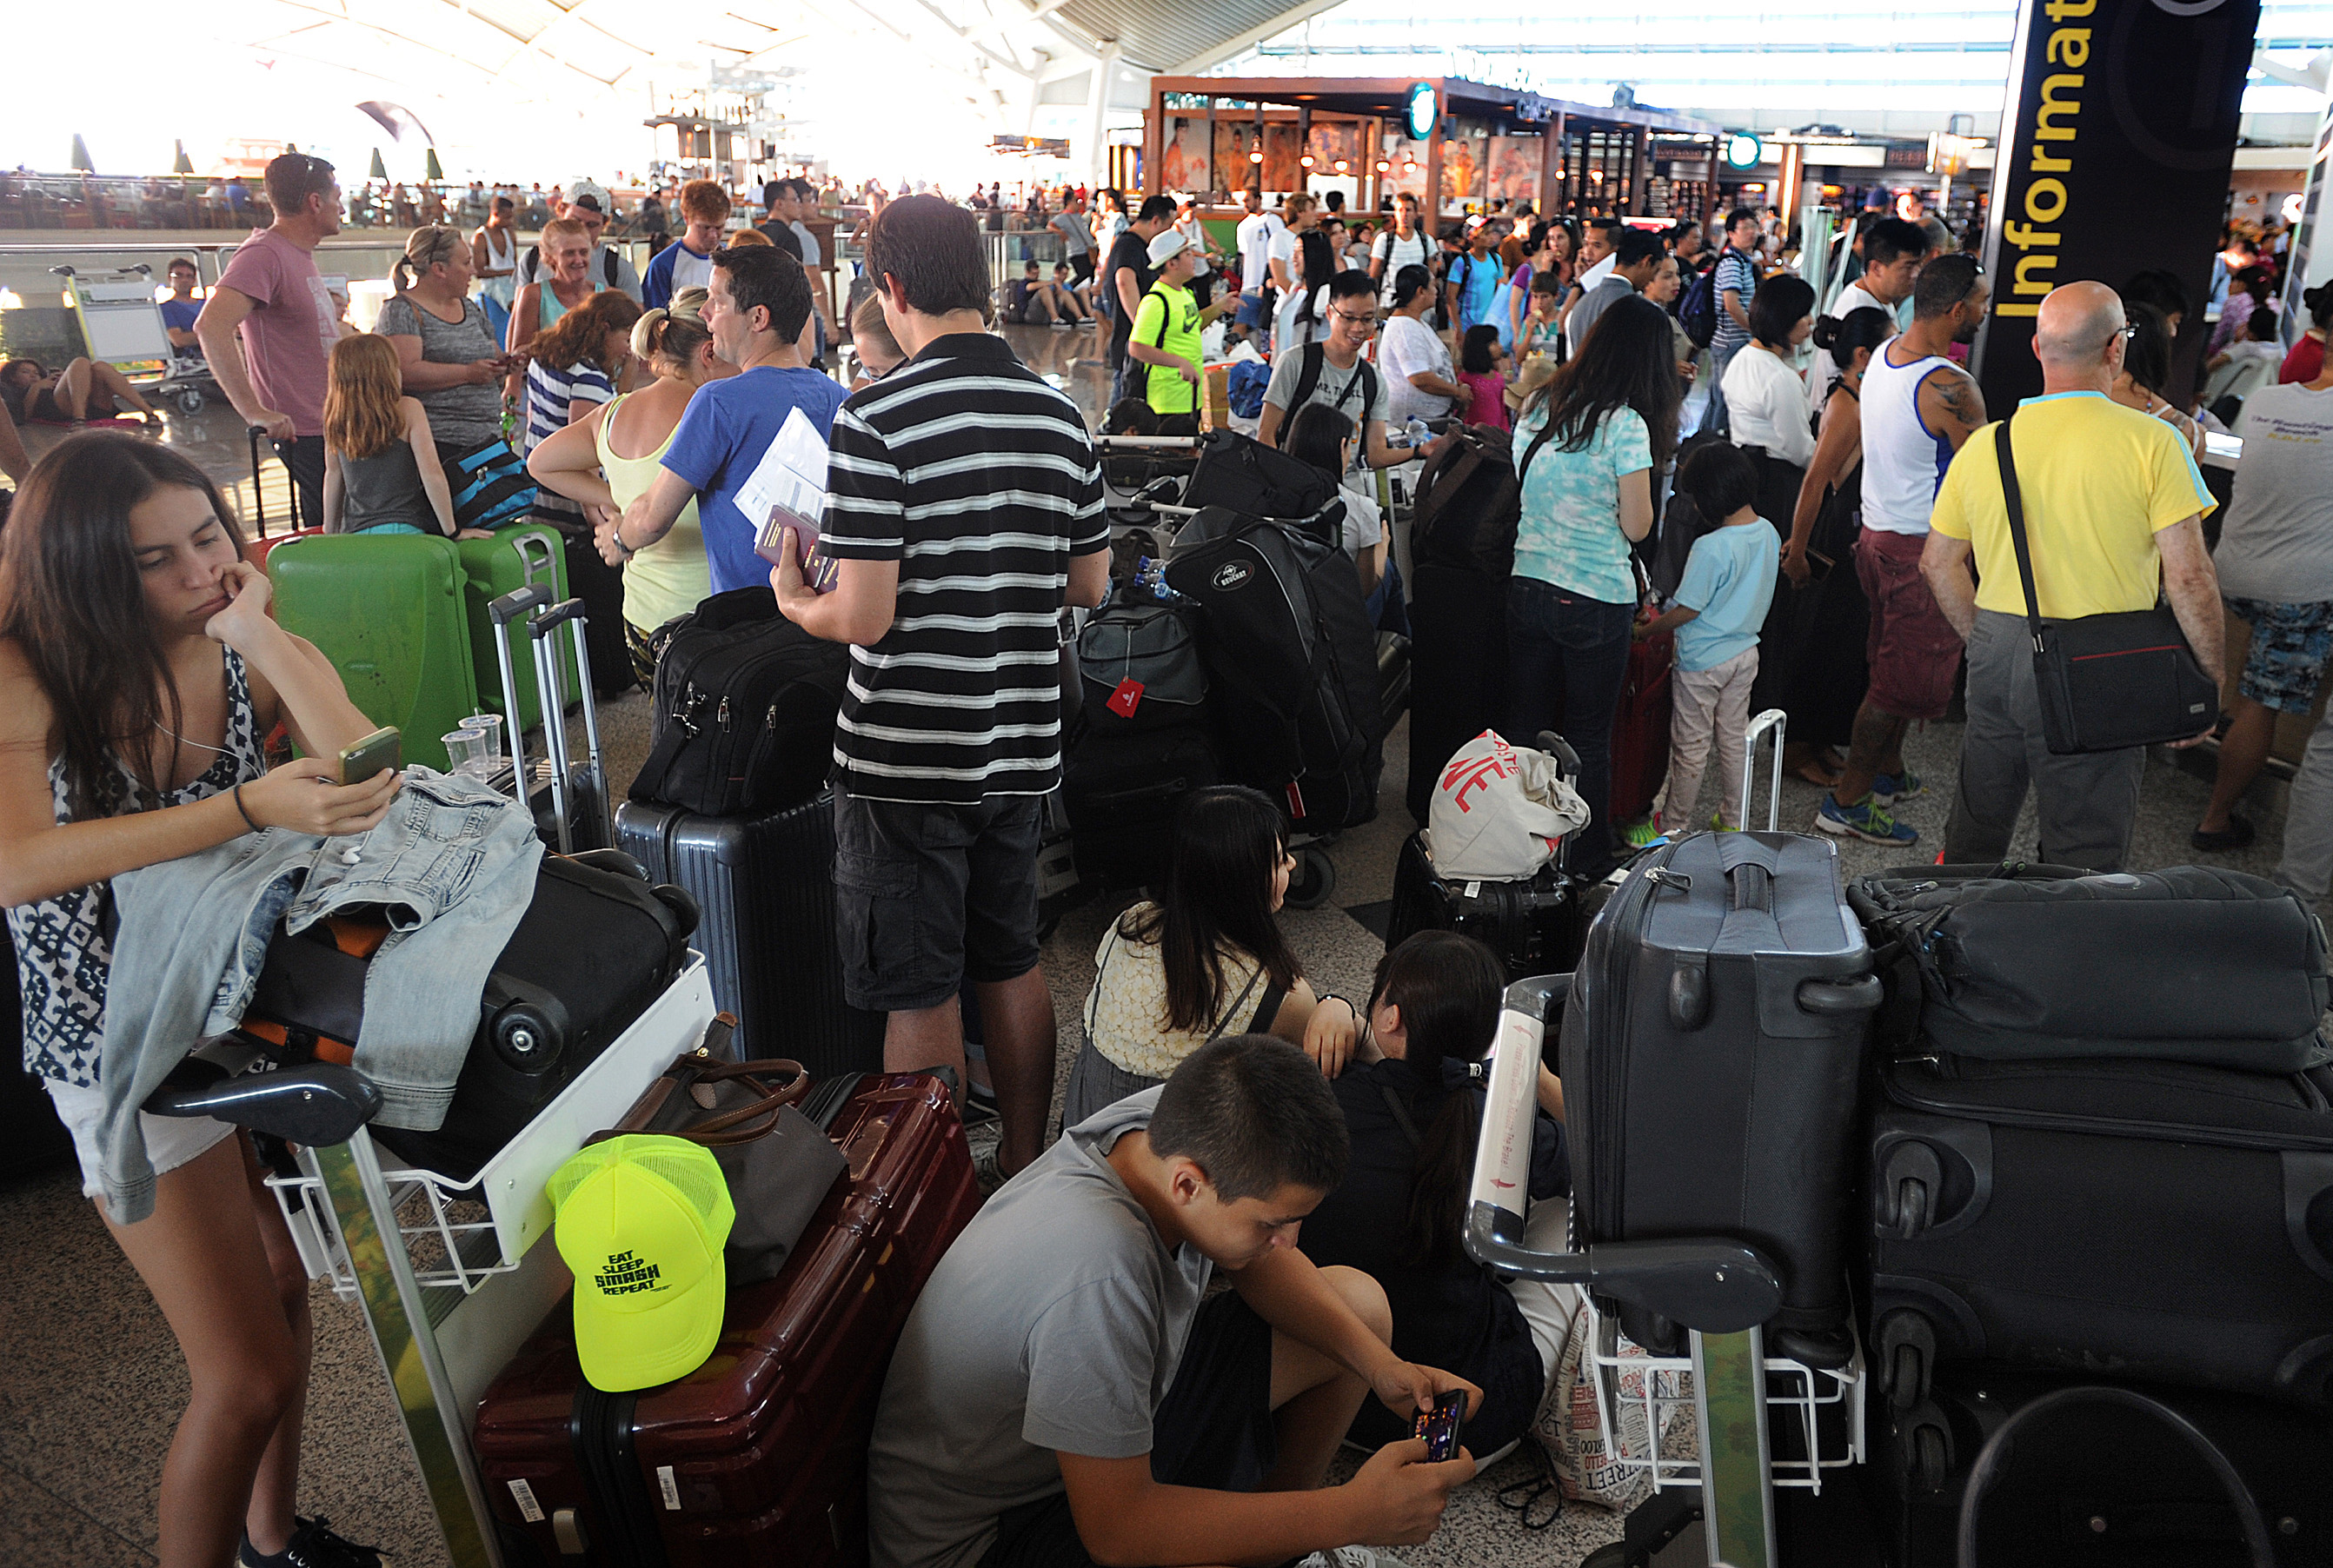 Travelers wait as flights are cancelled due to the eruption of Mount Raung in East Java, at Ngurah Rai International Airport in Bali, Indonesia, Sunday, July 12, 2015.